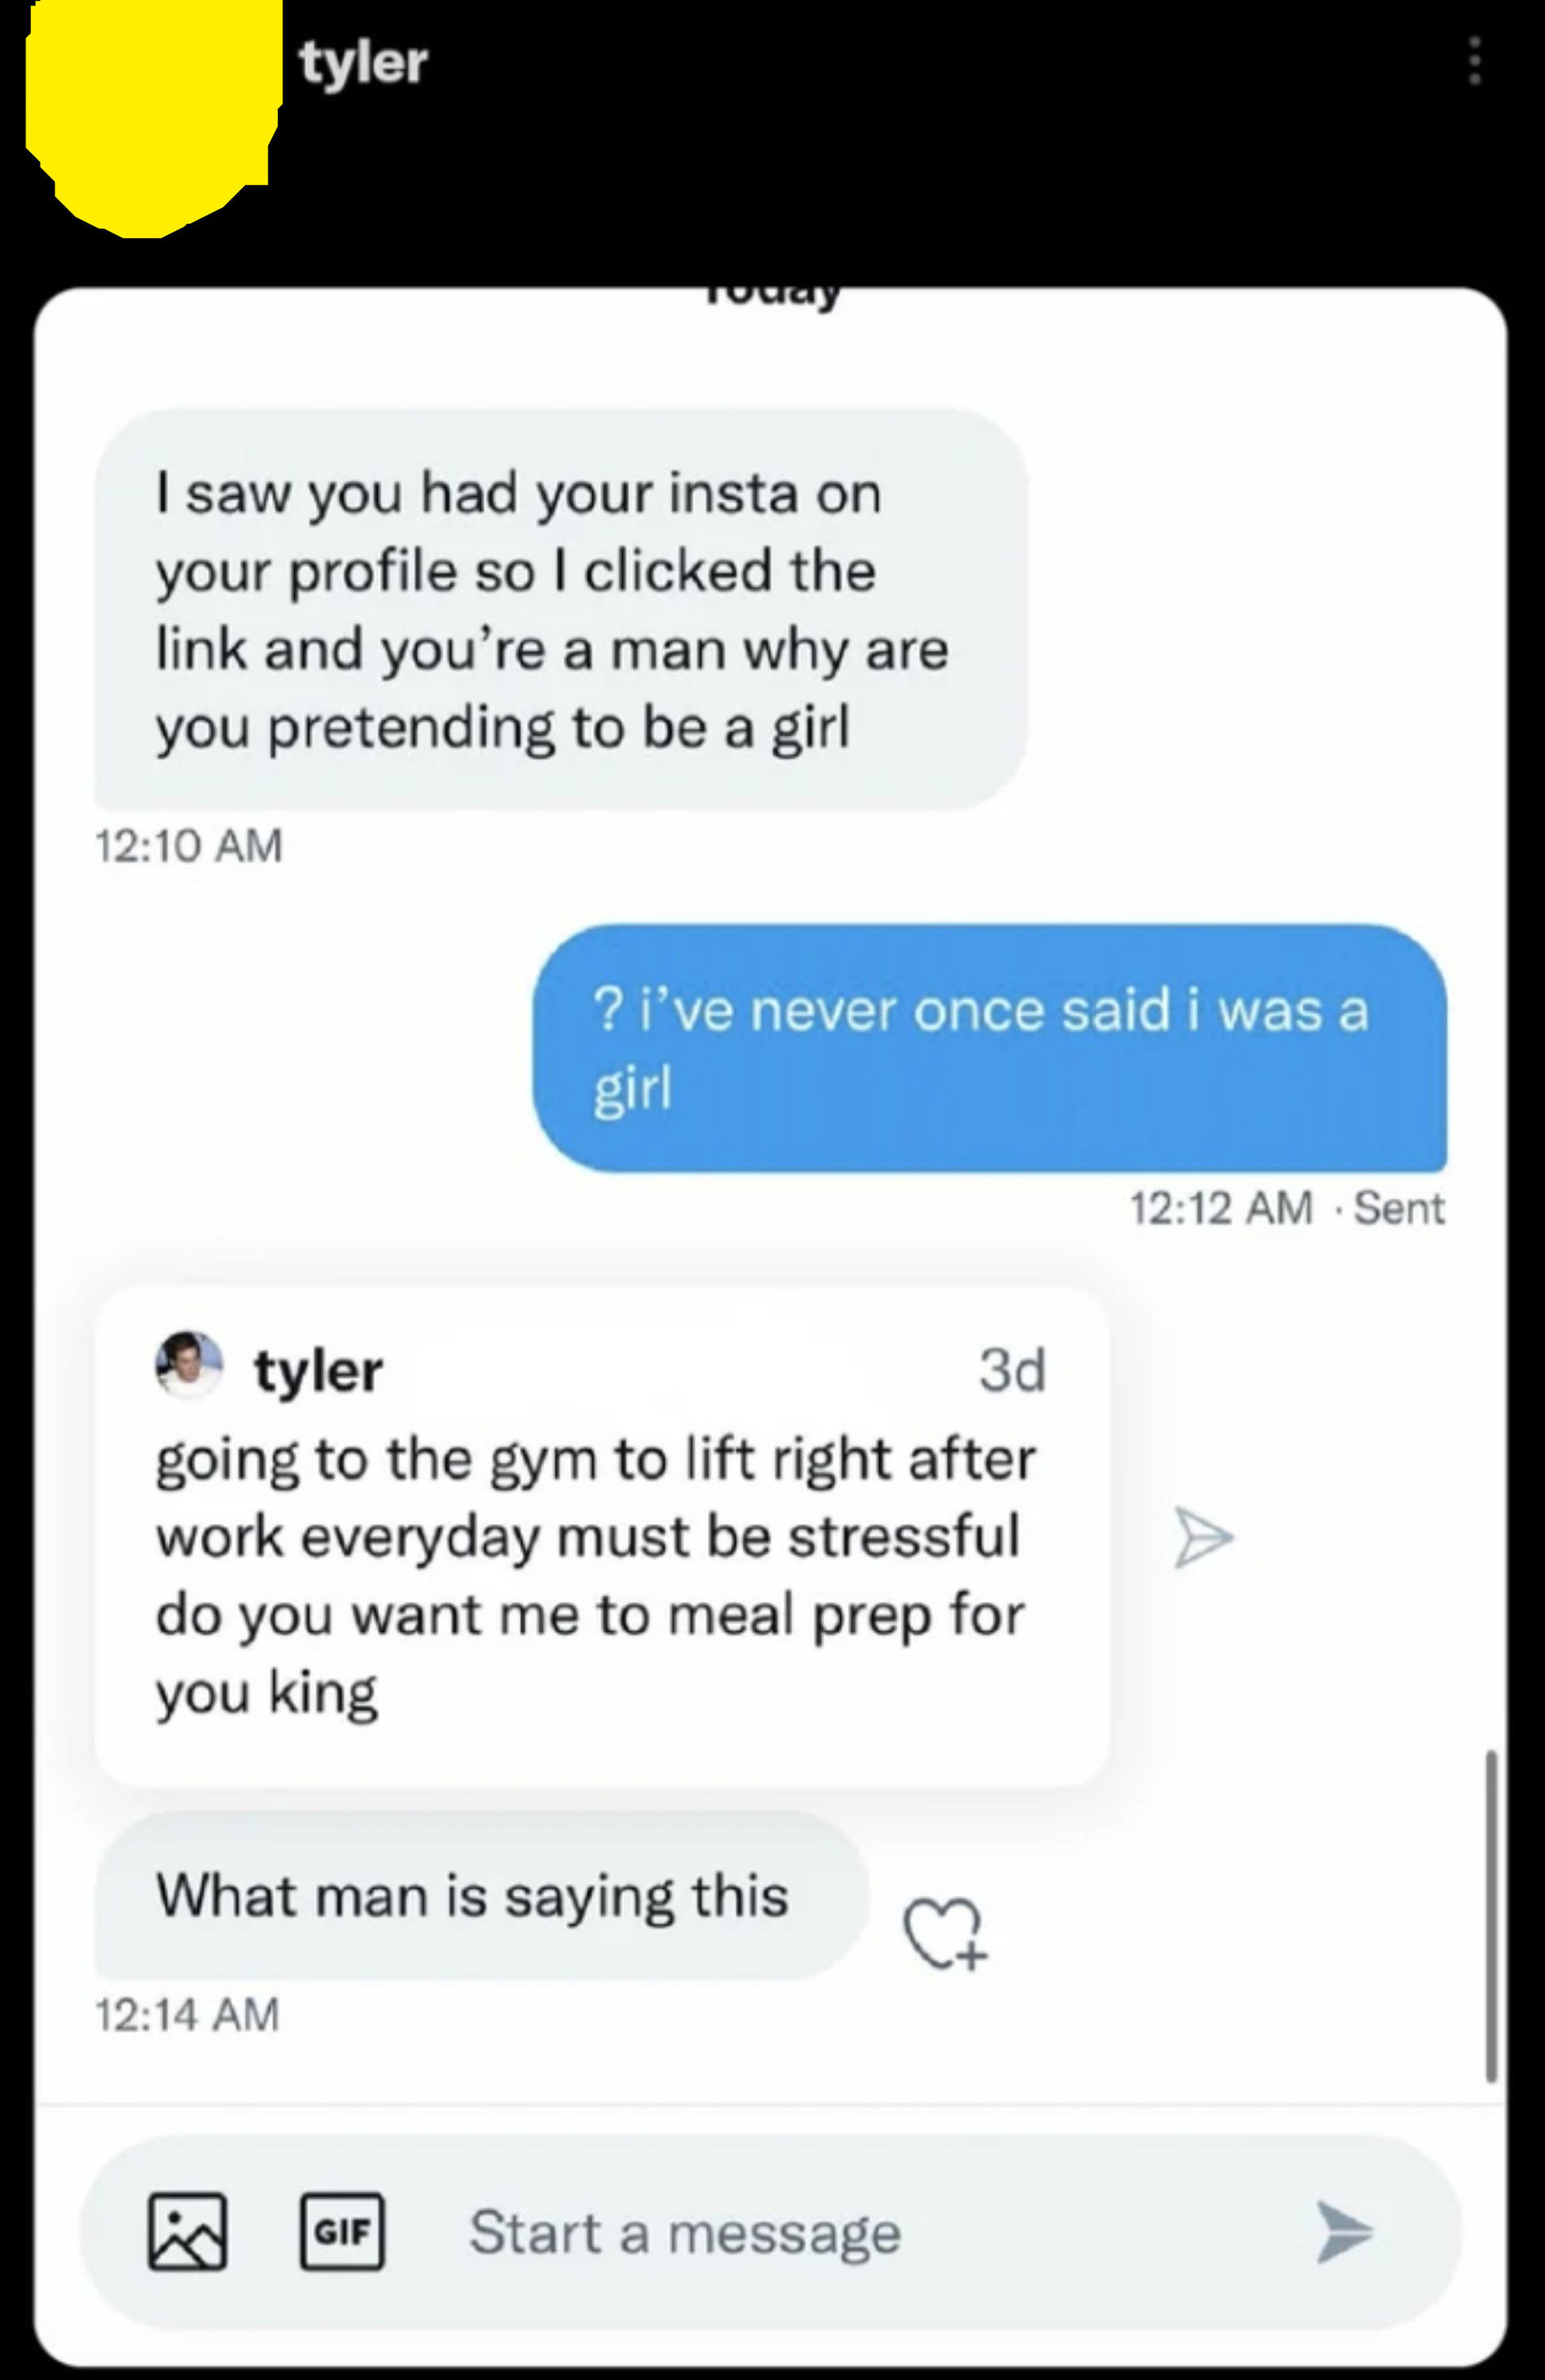 person thinking a person is a girl just because their bio says, do you want me to meal prep for you king?